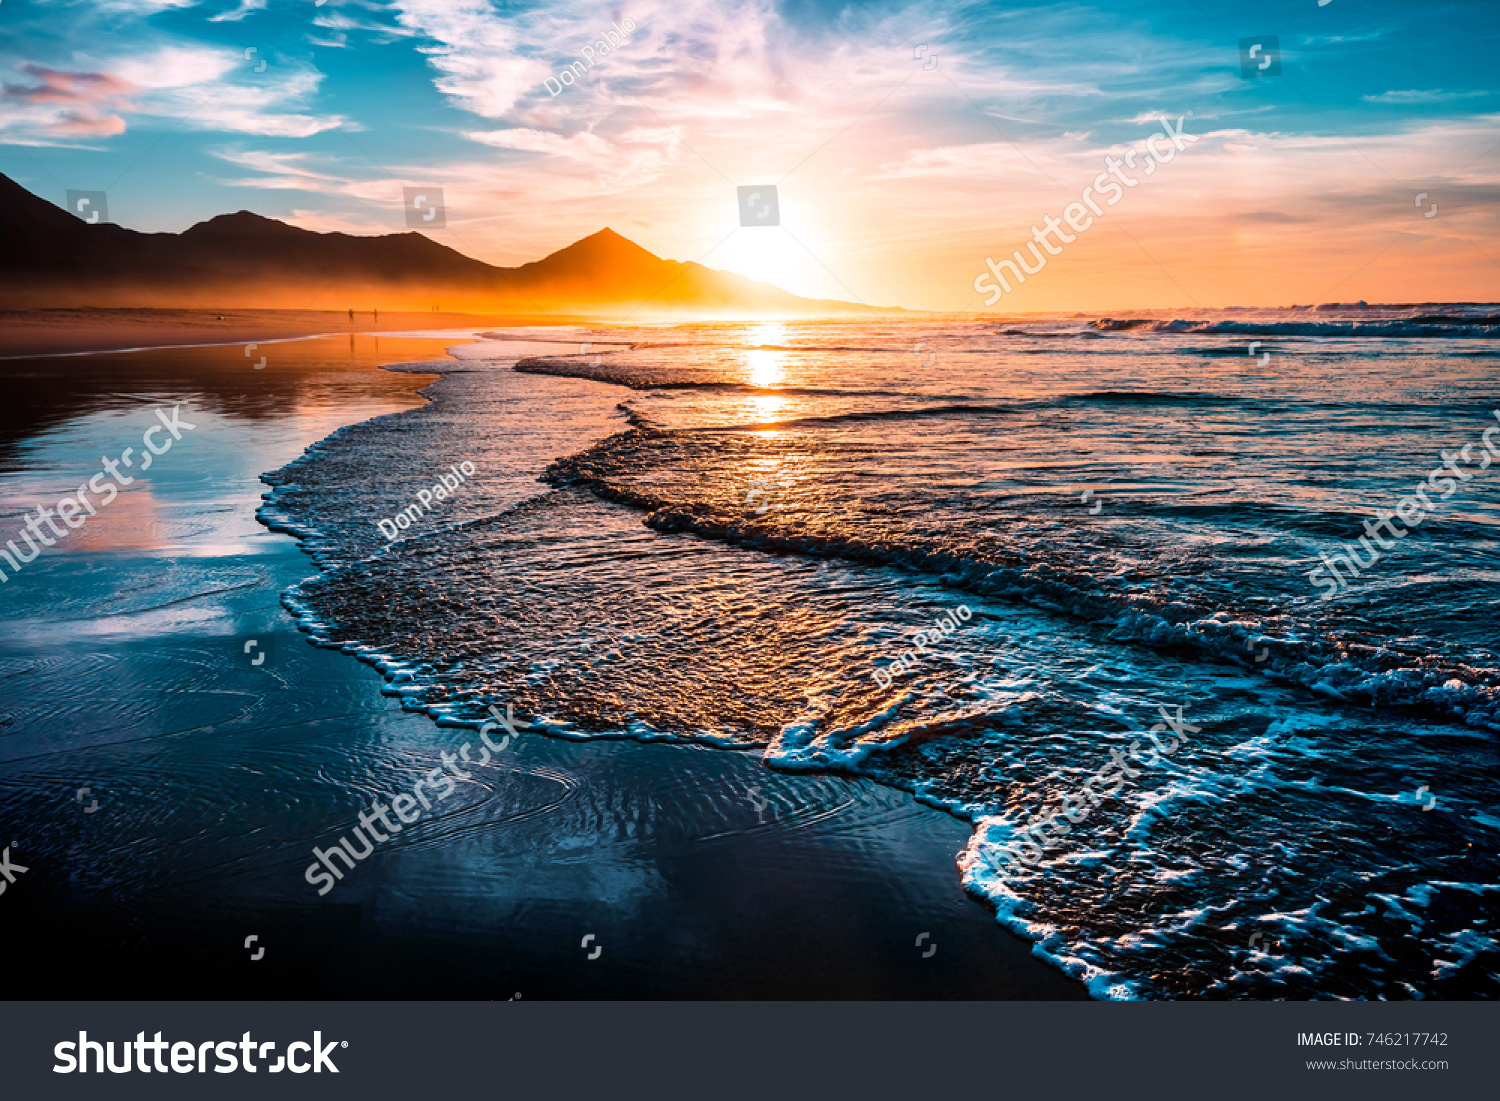 Amazing beach sunset with endless horizon and lonely figures in the distance, and incredible foamy waves. Volcanic hills in the background. #746217742